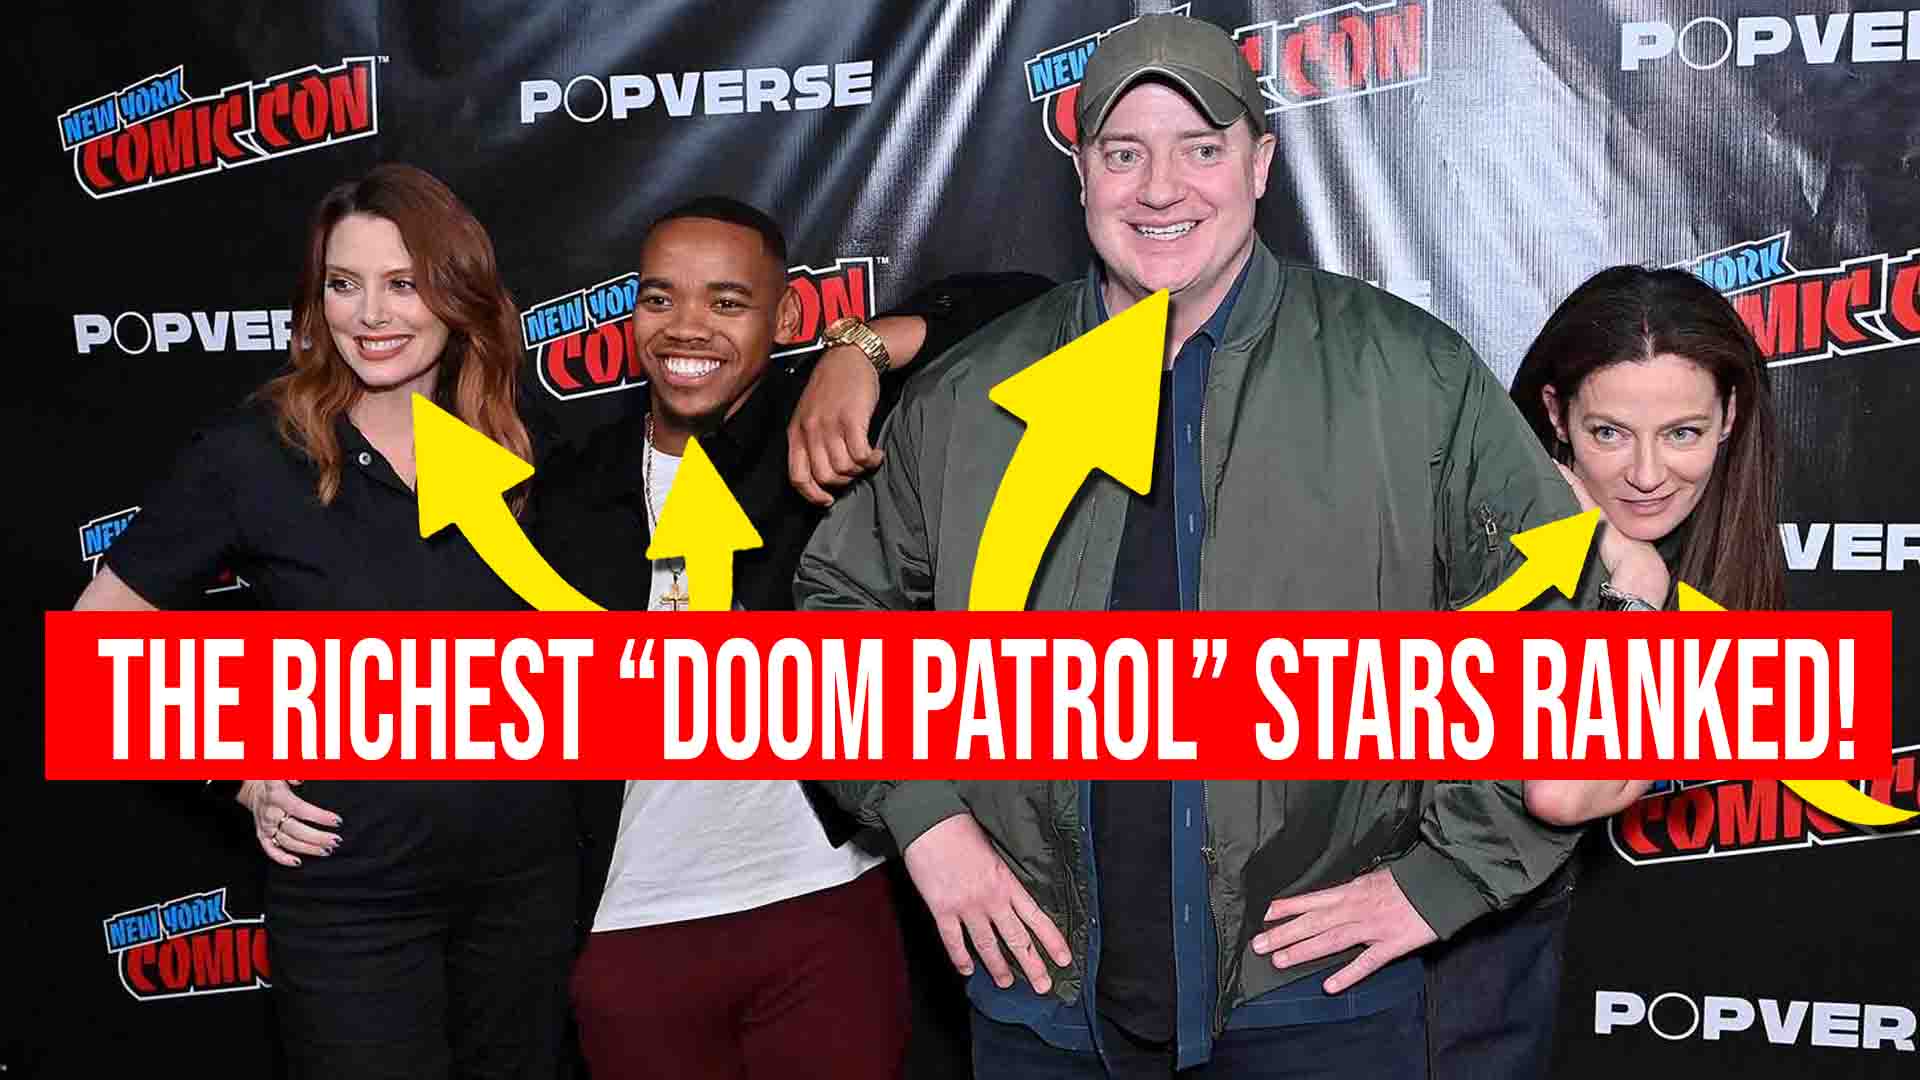 The Richest “Doom Patrol” Stars Ranked From Lowest To Highest